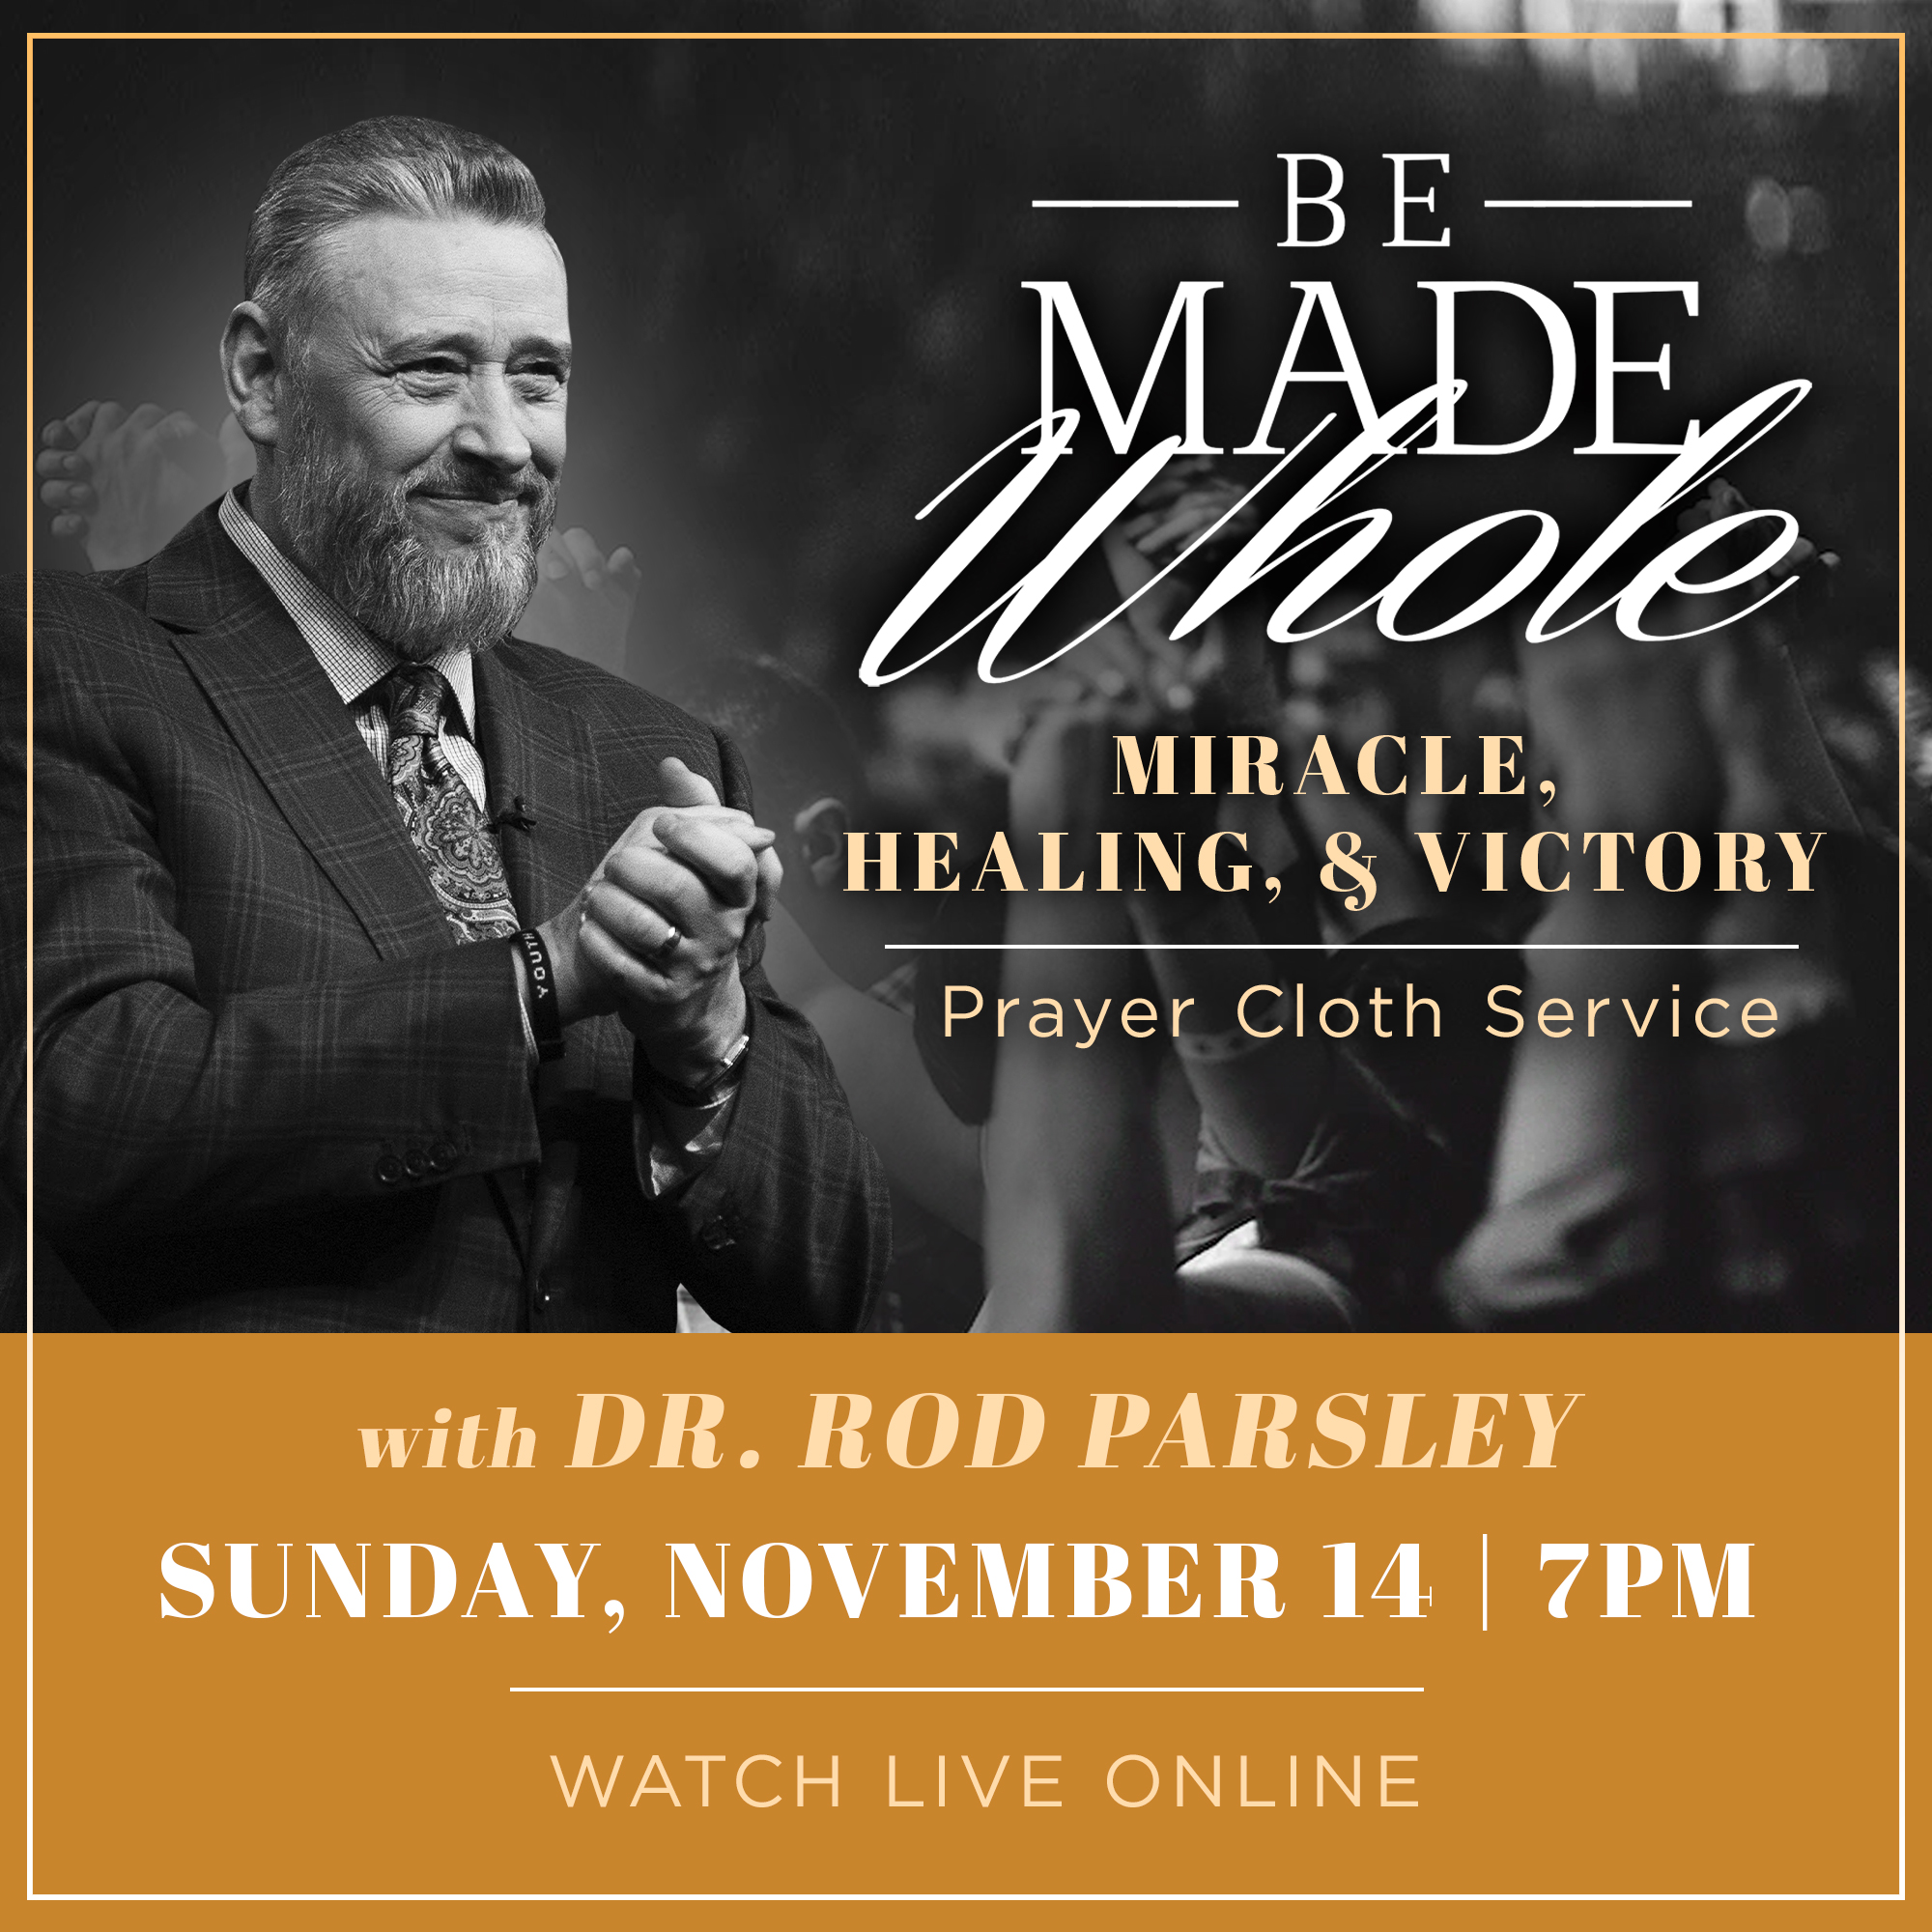 Be Made Whole Miracle, Healing, and Victory Prayer Cloth Service with Dr. Rod Parsley Sunday, November 14 at 7pm Live In-person or Online